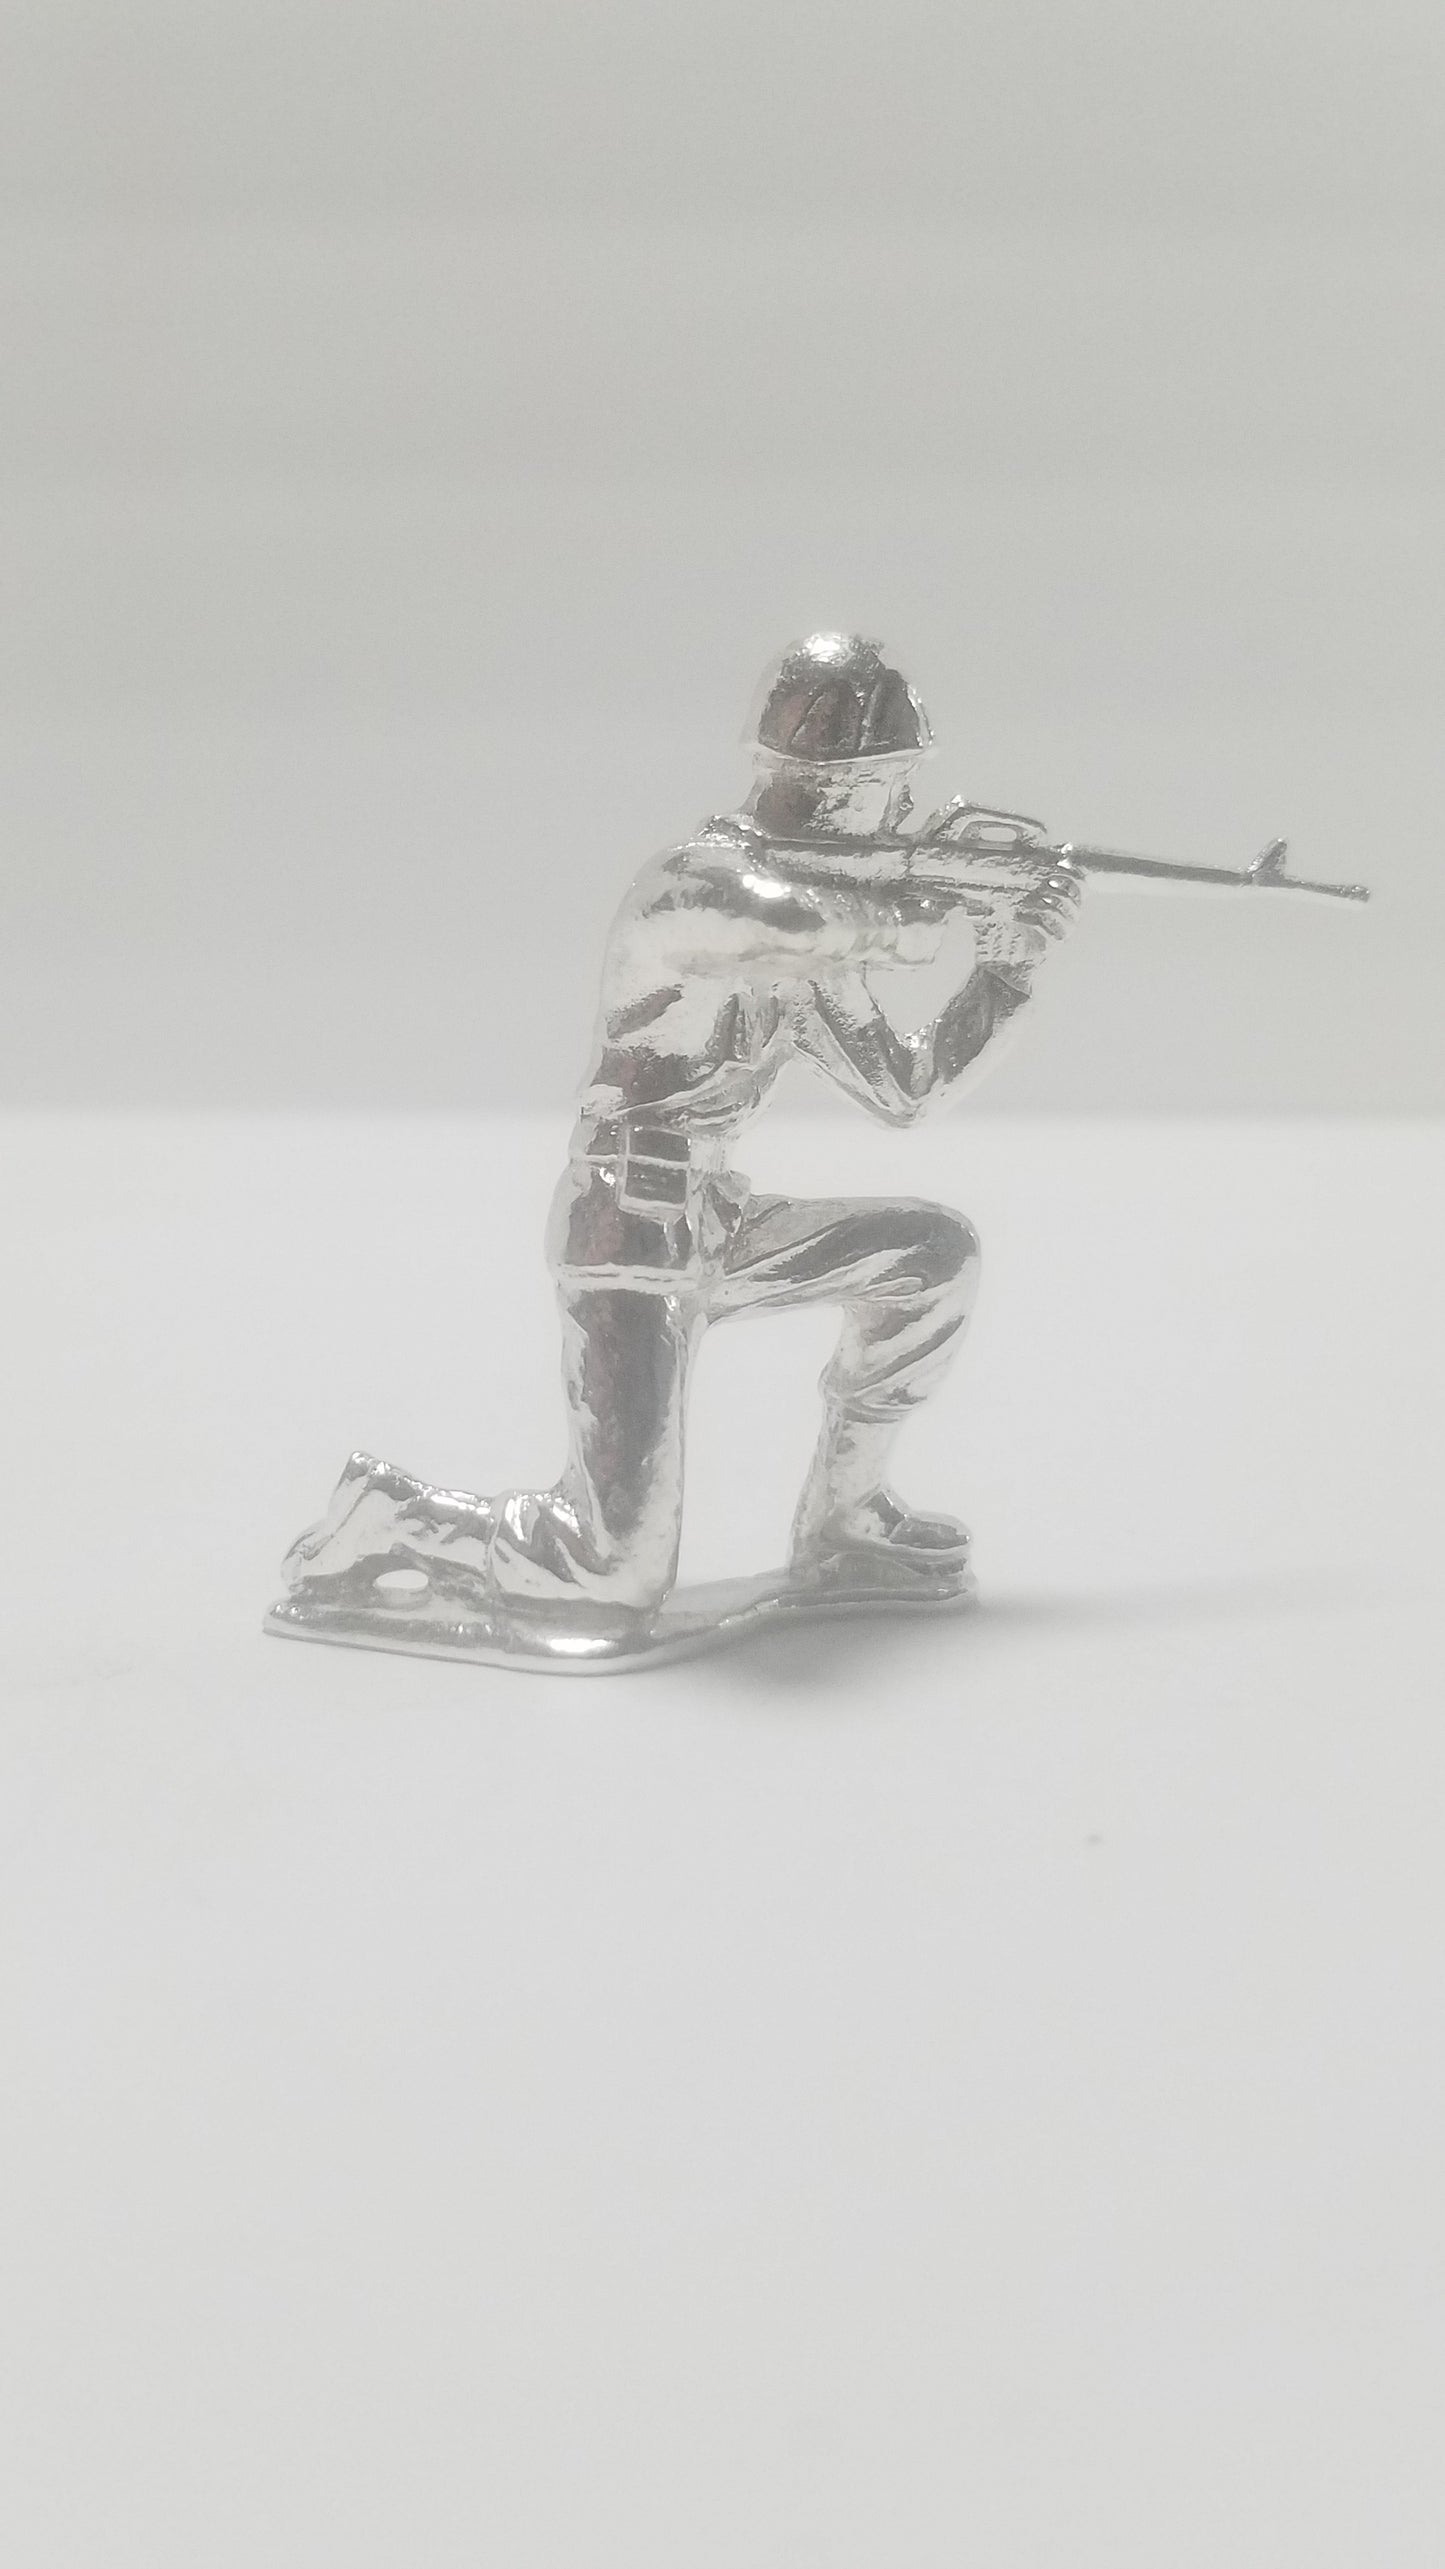 Classic Army Man Kneeling Soldier 1.25 oz 999 Silver Hand Poured Bullion